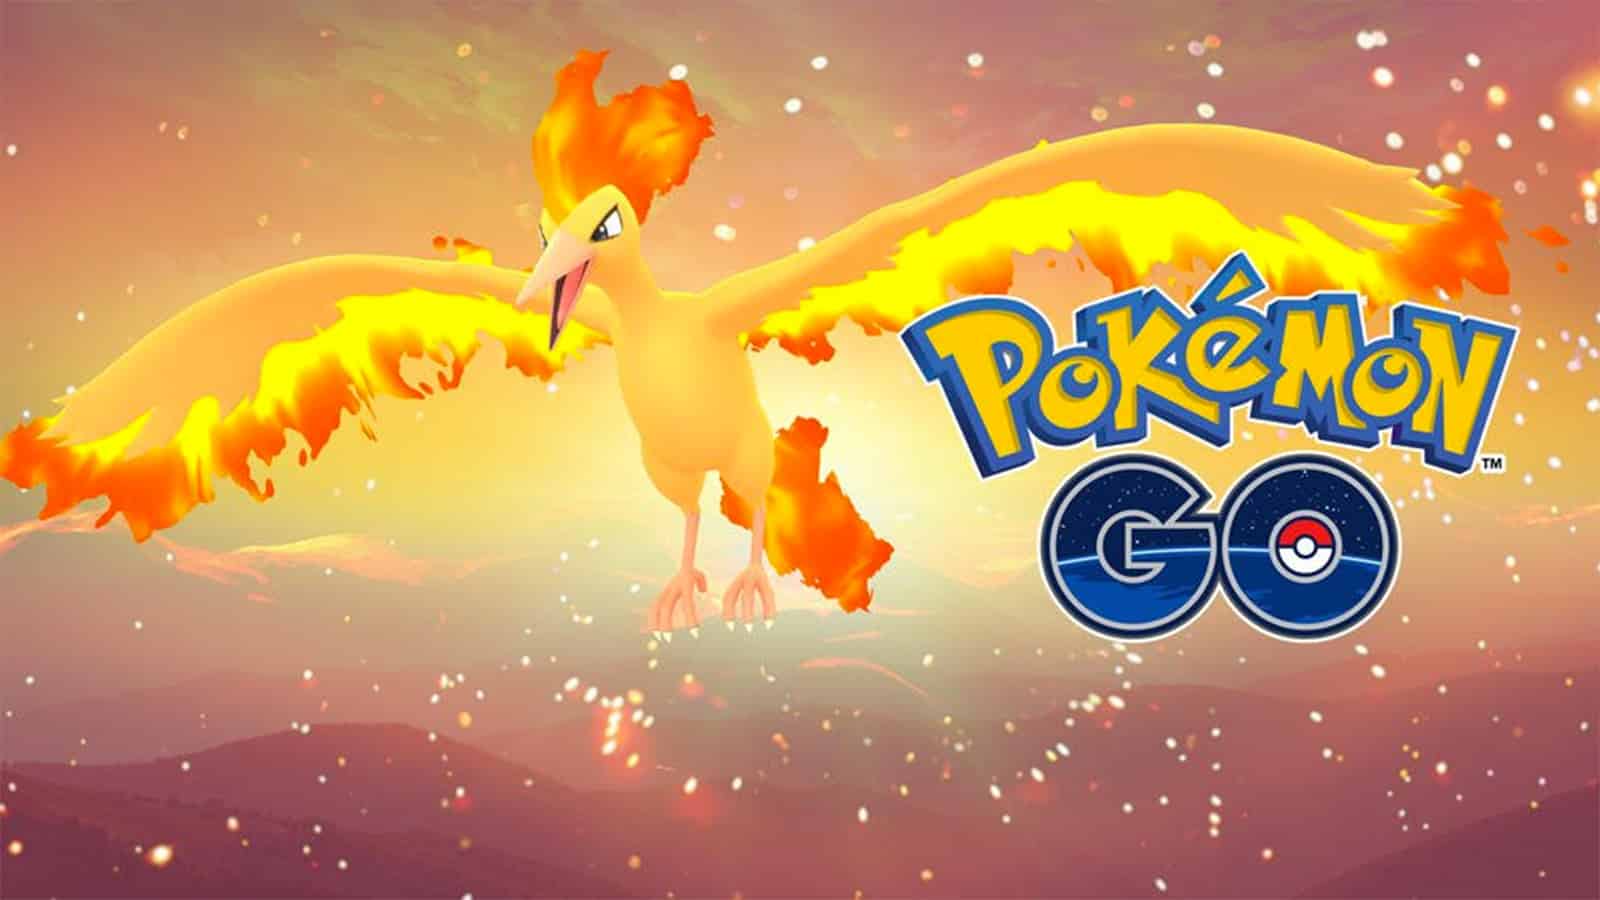 Pokemon GO Shadow Moltres raid guide: Weaknesses, best counters